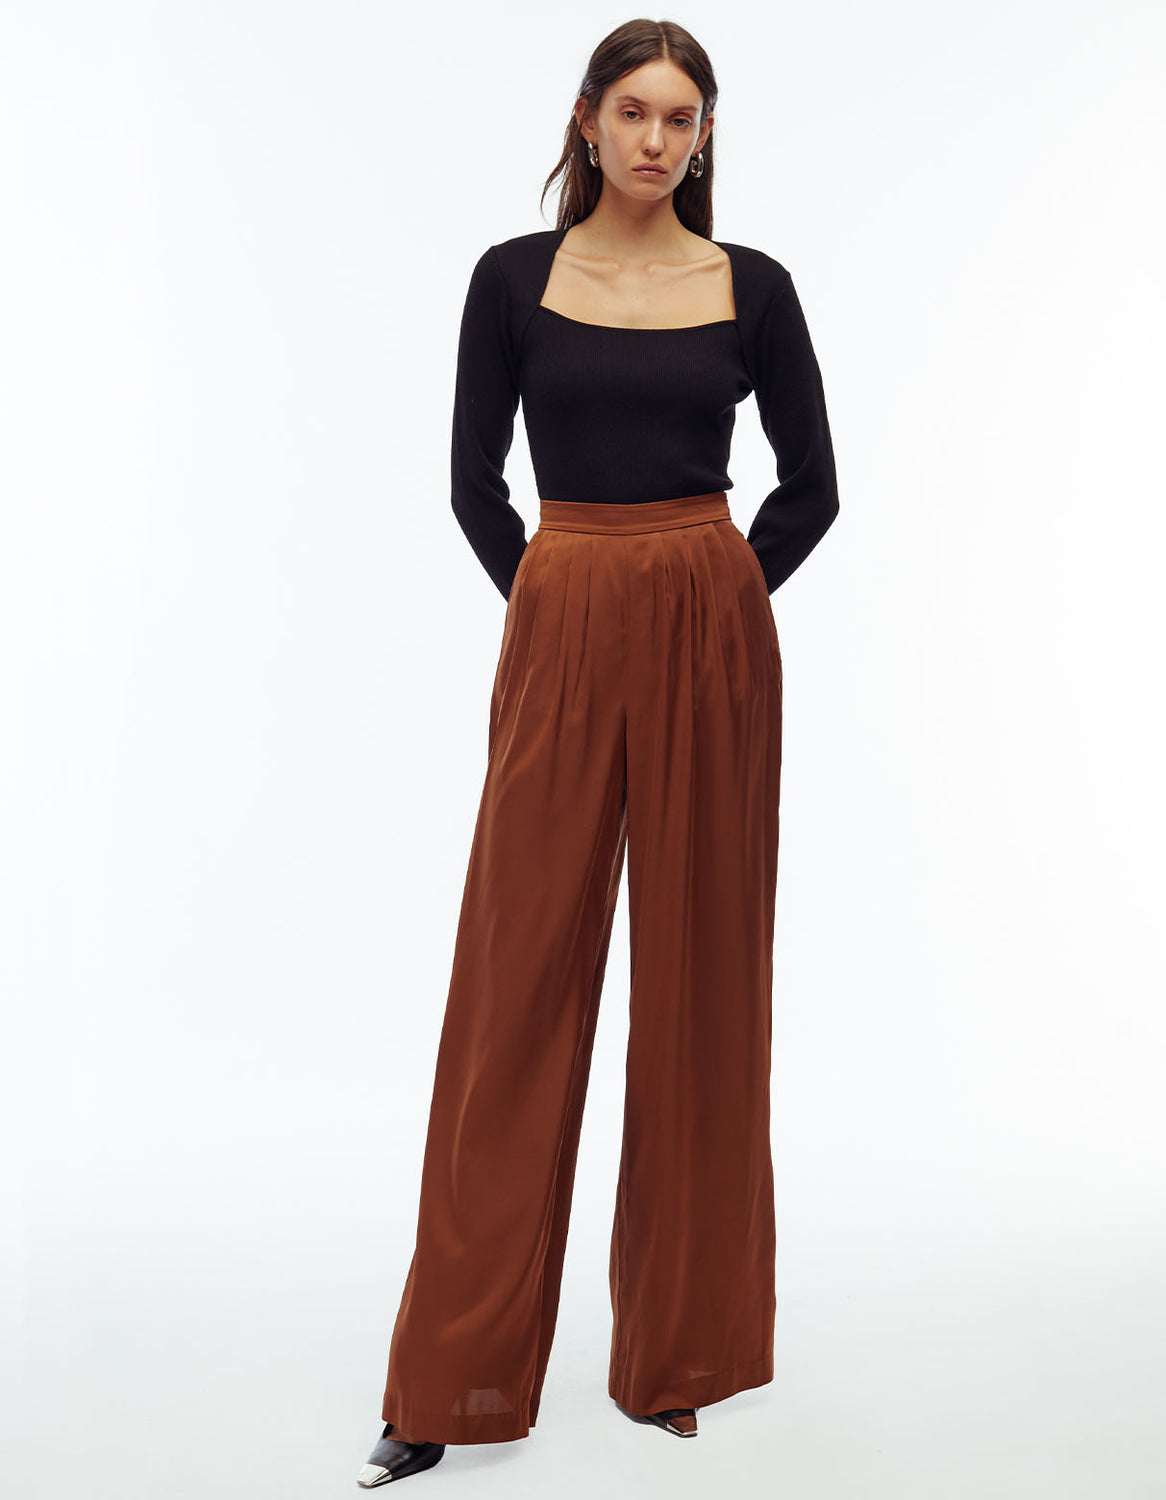 Look 25 - Leila Top + Betty Trousers